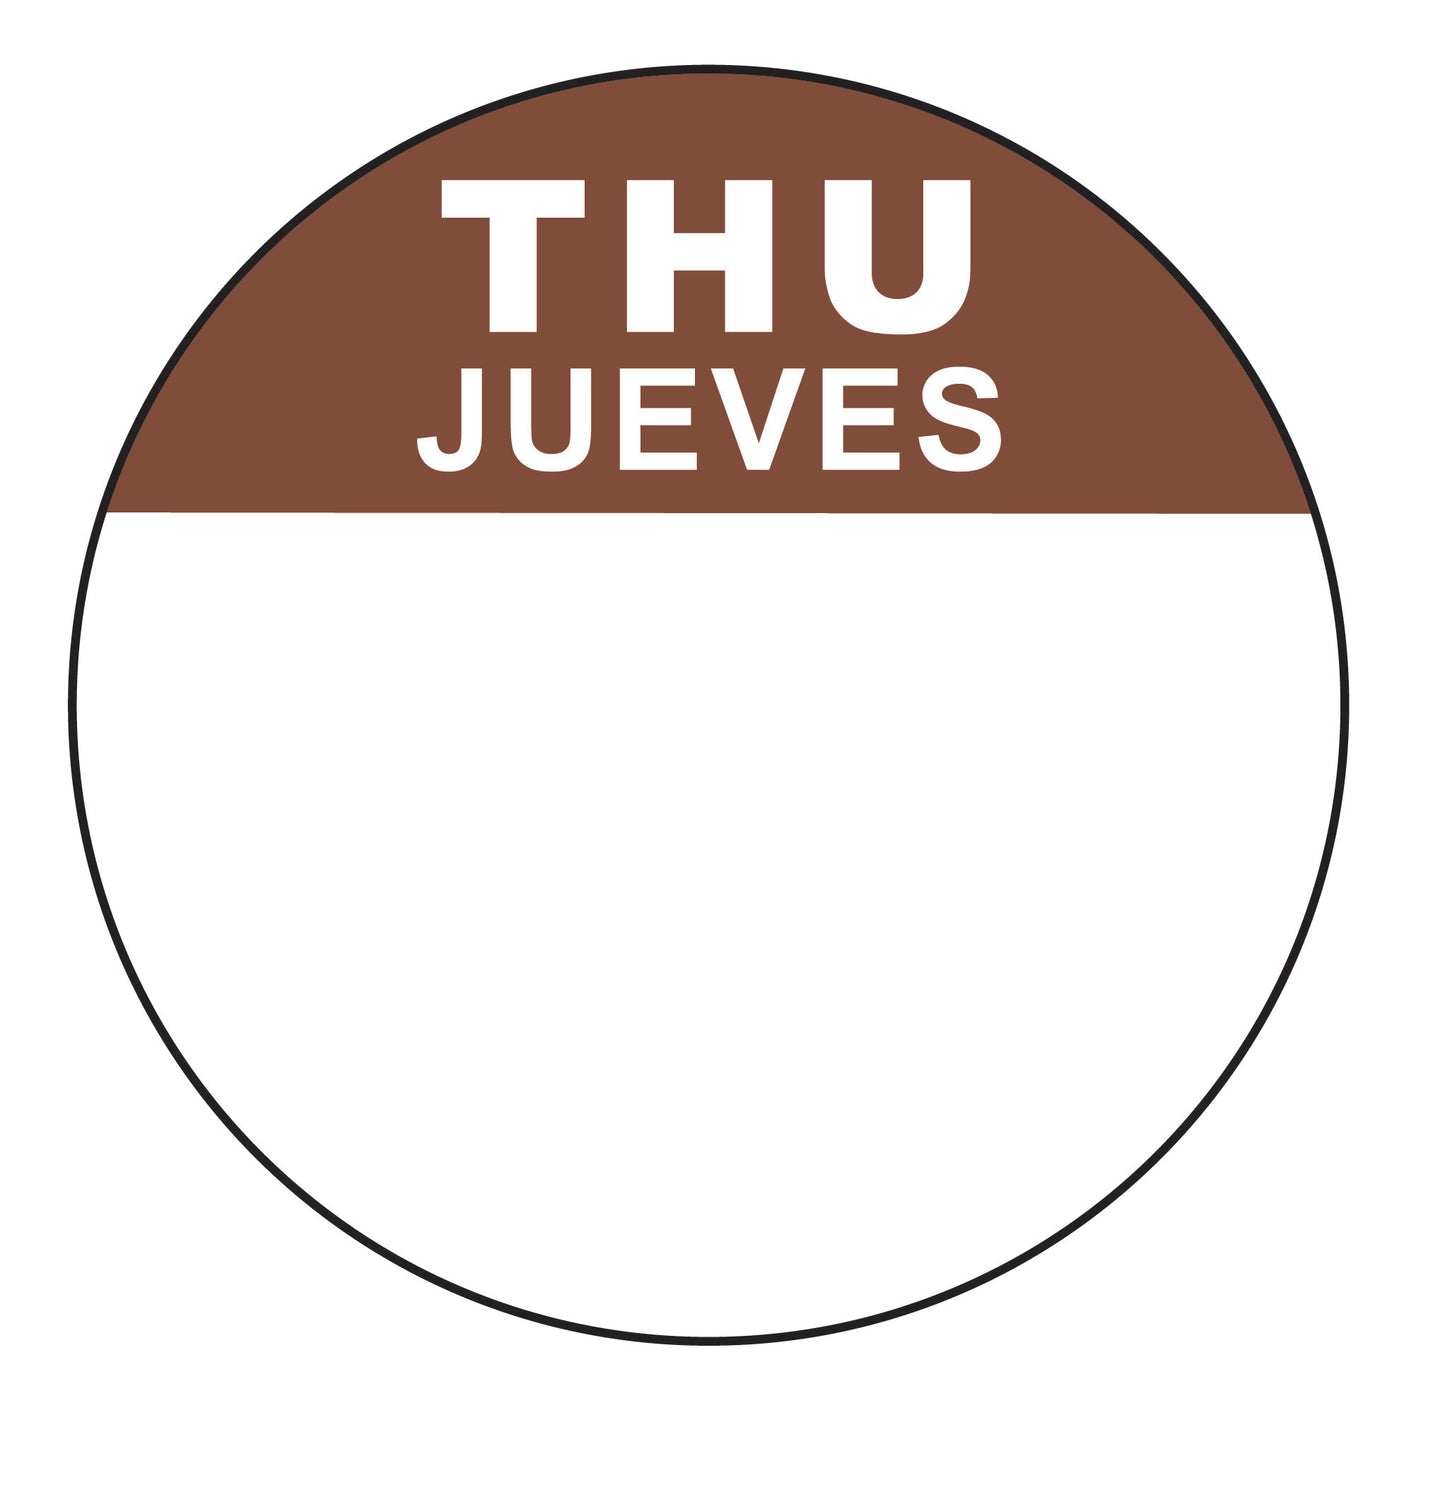 Thursday - Jueves 1.5" Cold Temperature Day of the Week Date Label